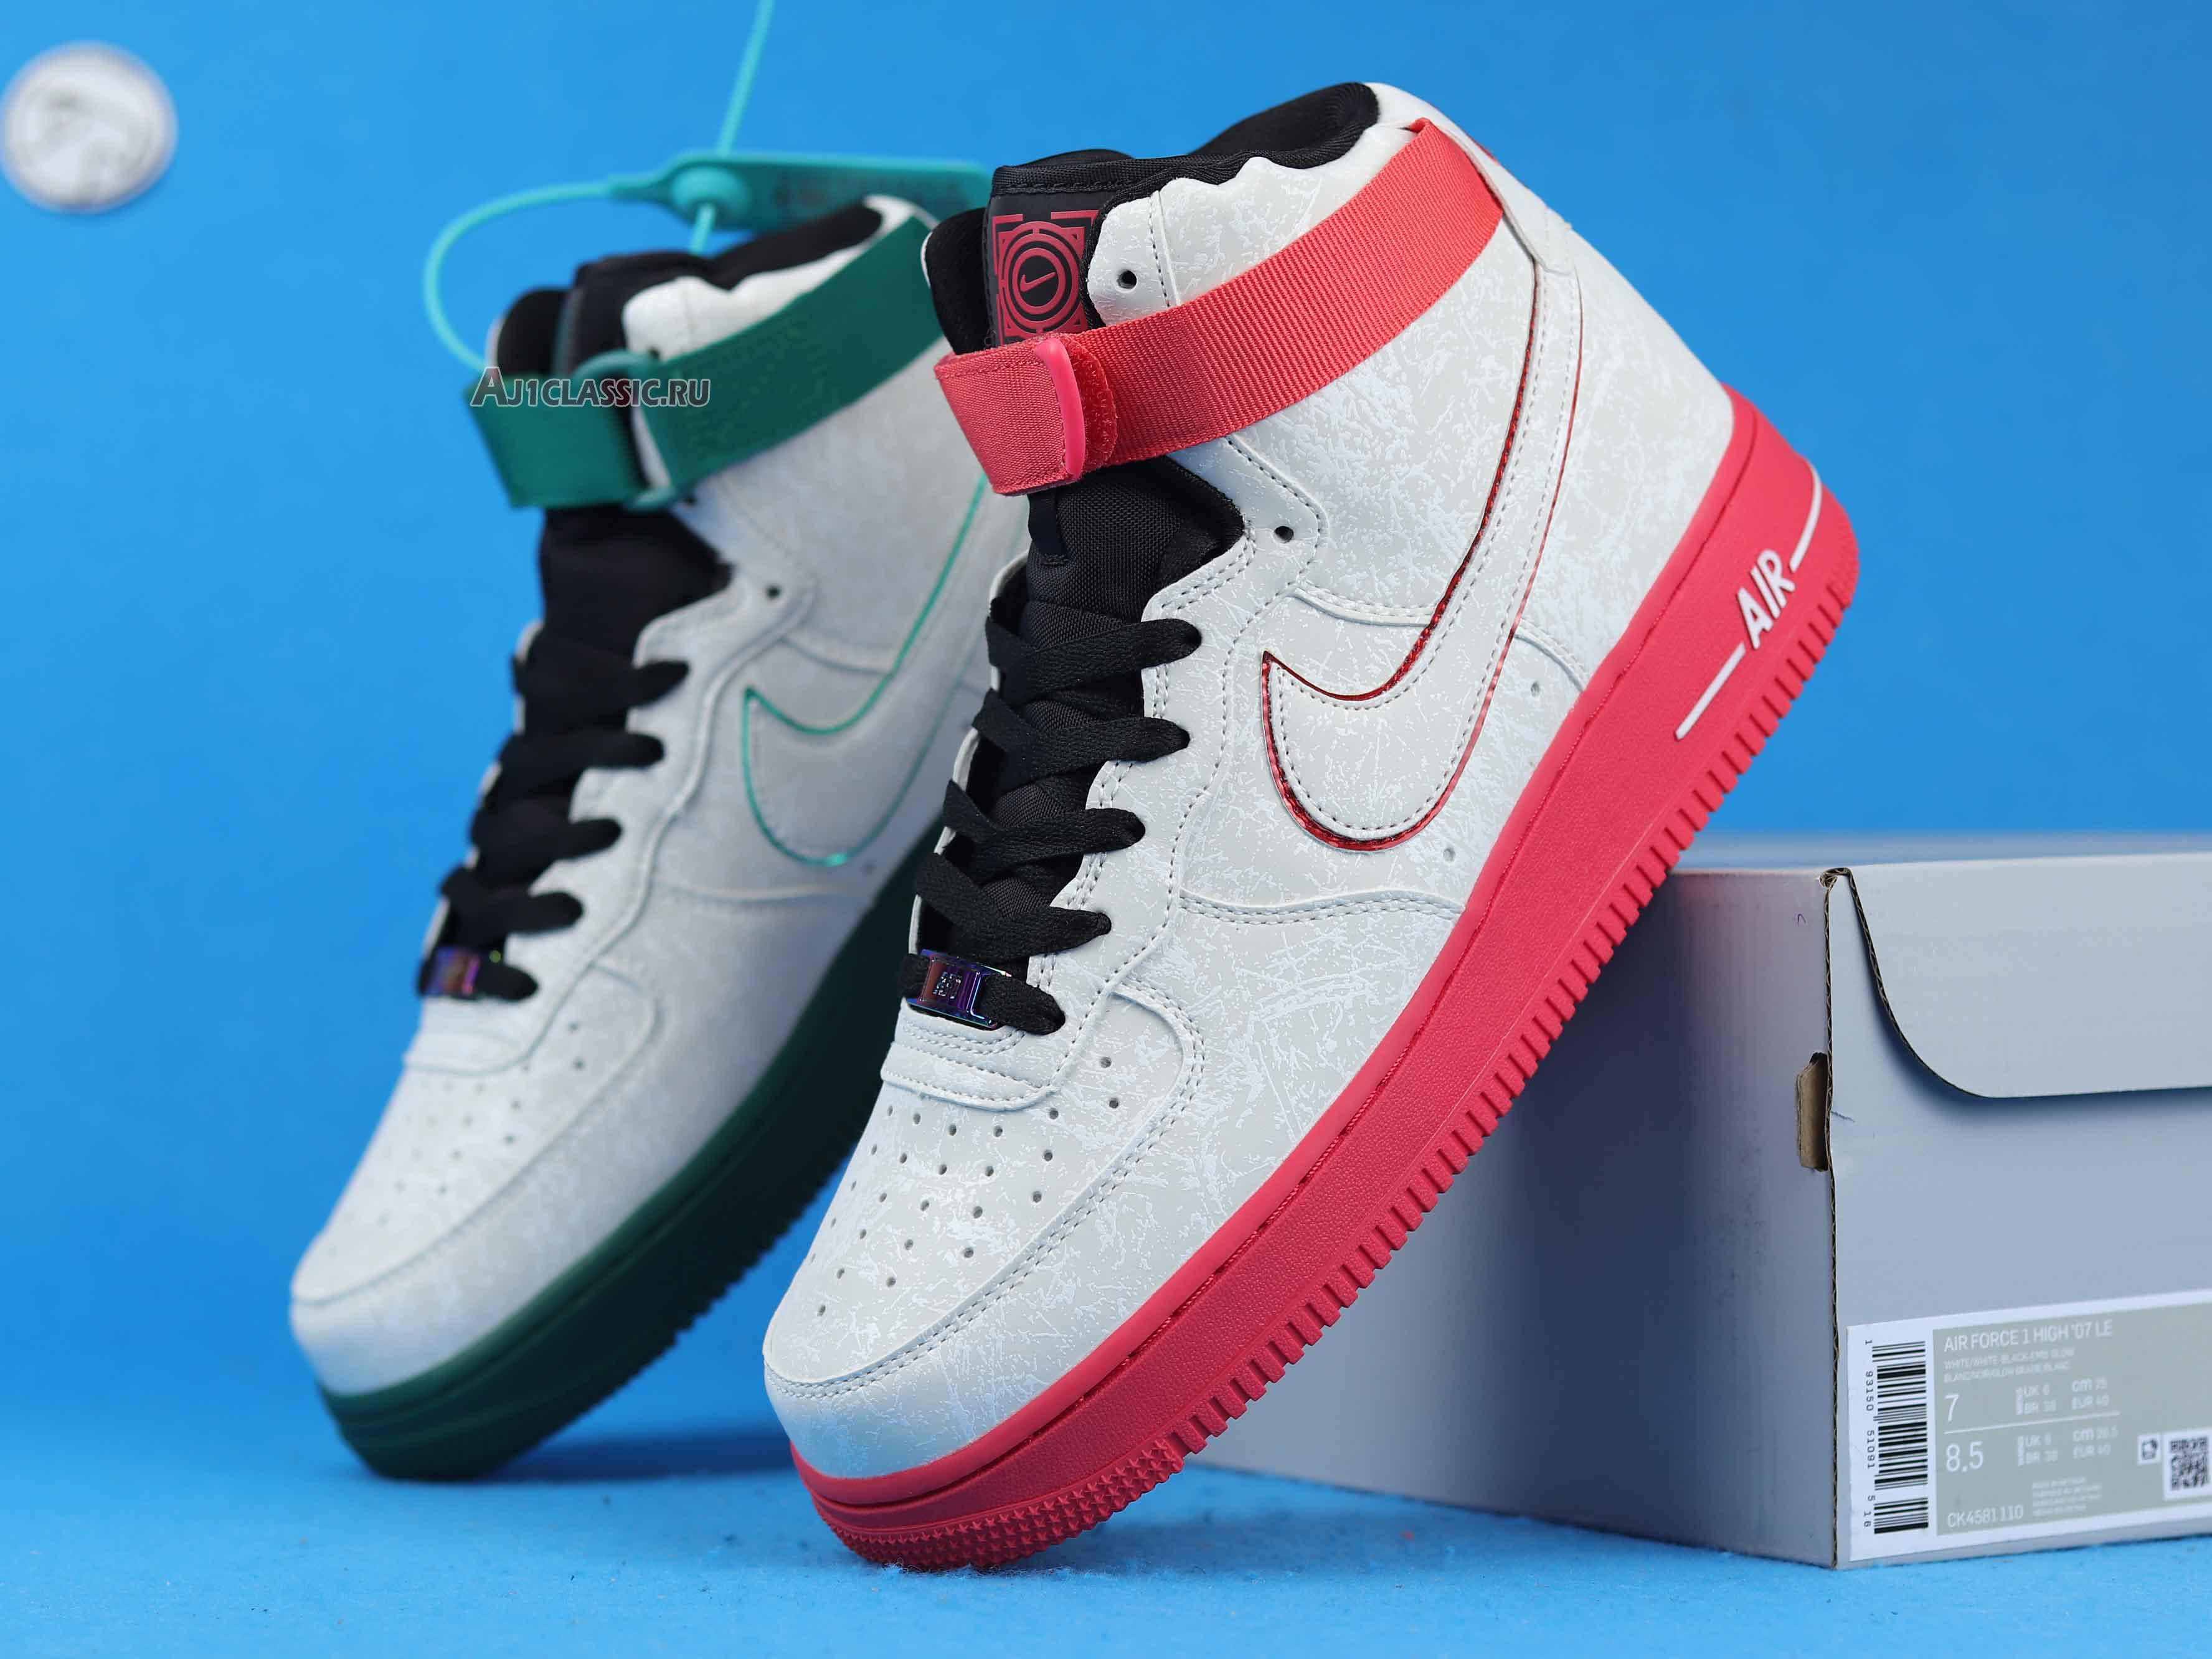 Nike Air Force 1 High 07 LV8 China Hoop Dreams CK4581-110 Reflective Silver/Green/Red Sneakers